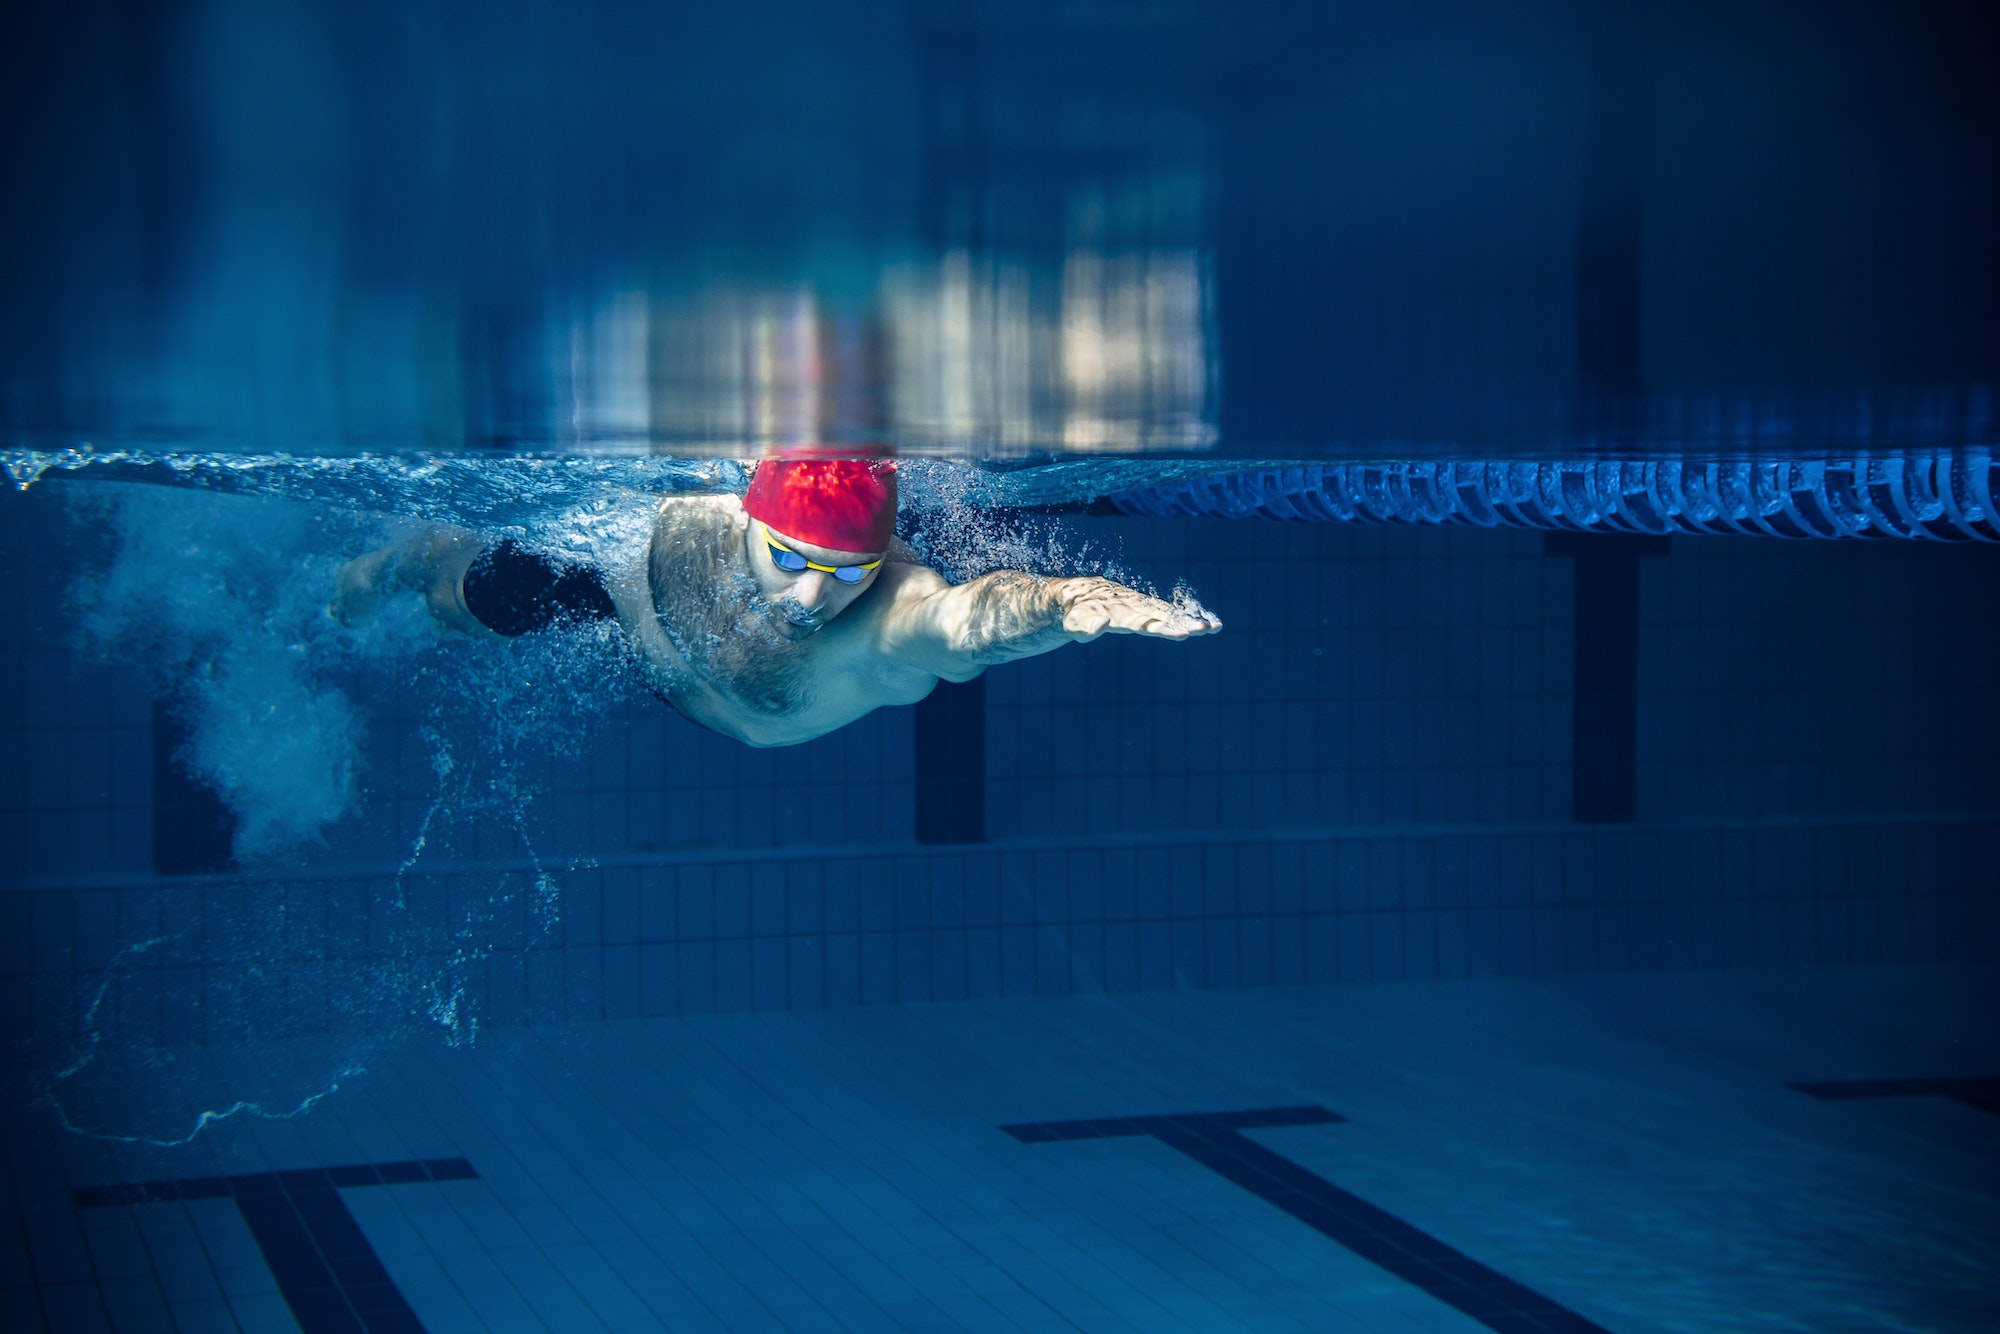 One male swimmer practicing and training at pool, indoors. Underwater view of swimming movements